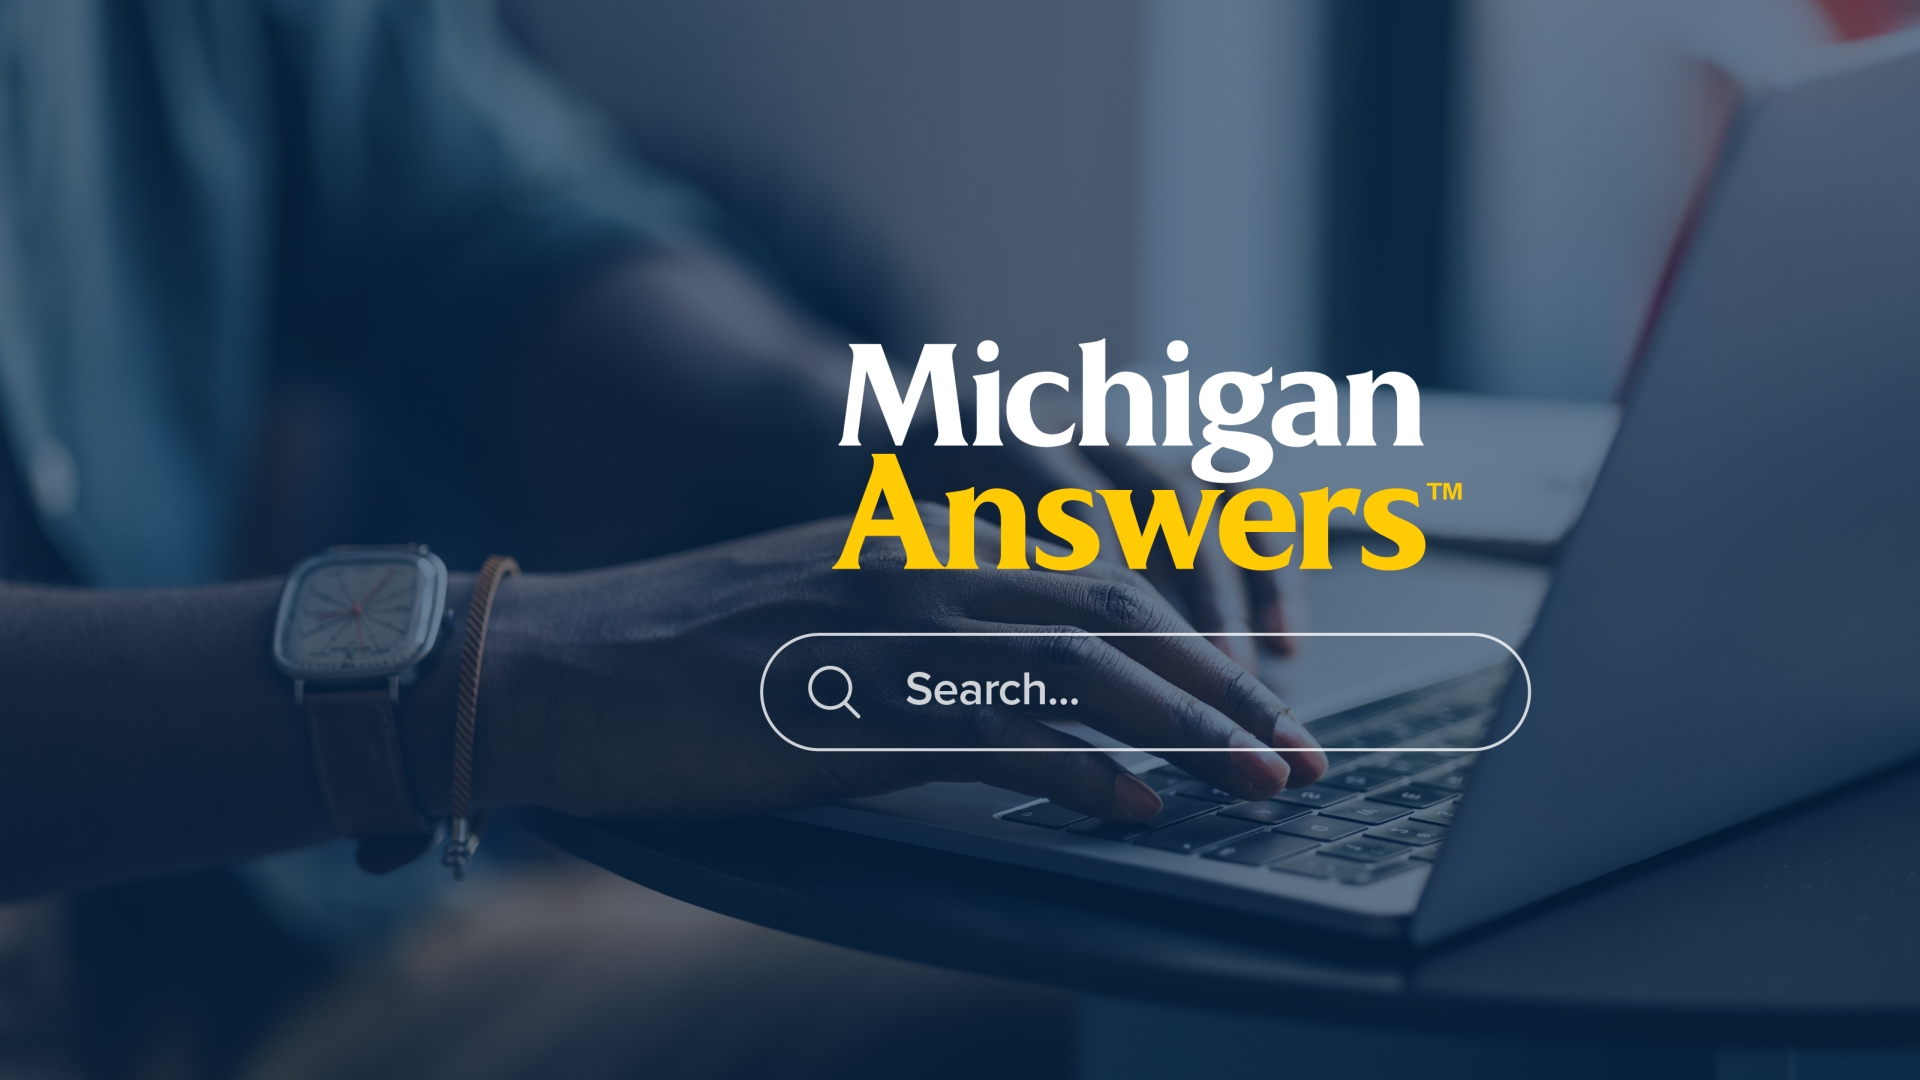 Michigan Answers with a search box underneath and hands on a laptop keyboard with gray overlay in the background.